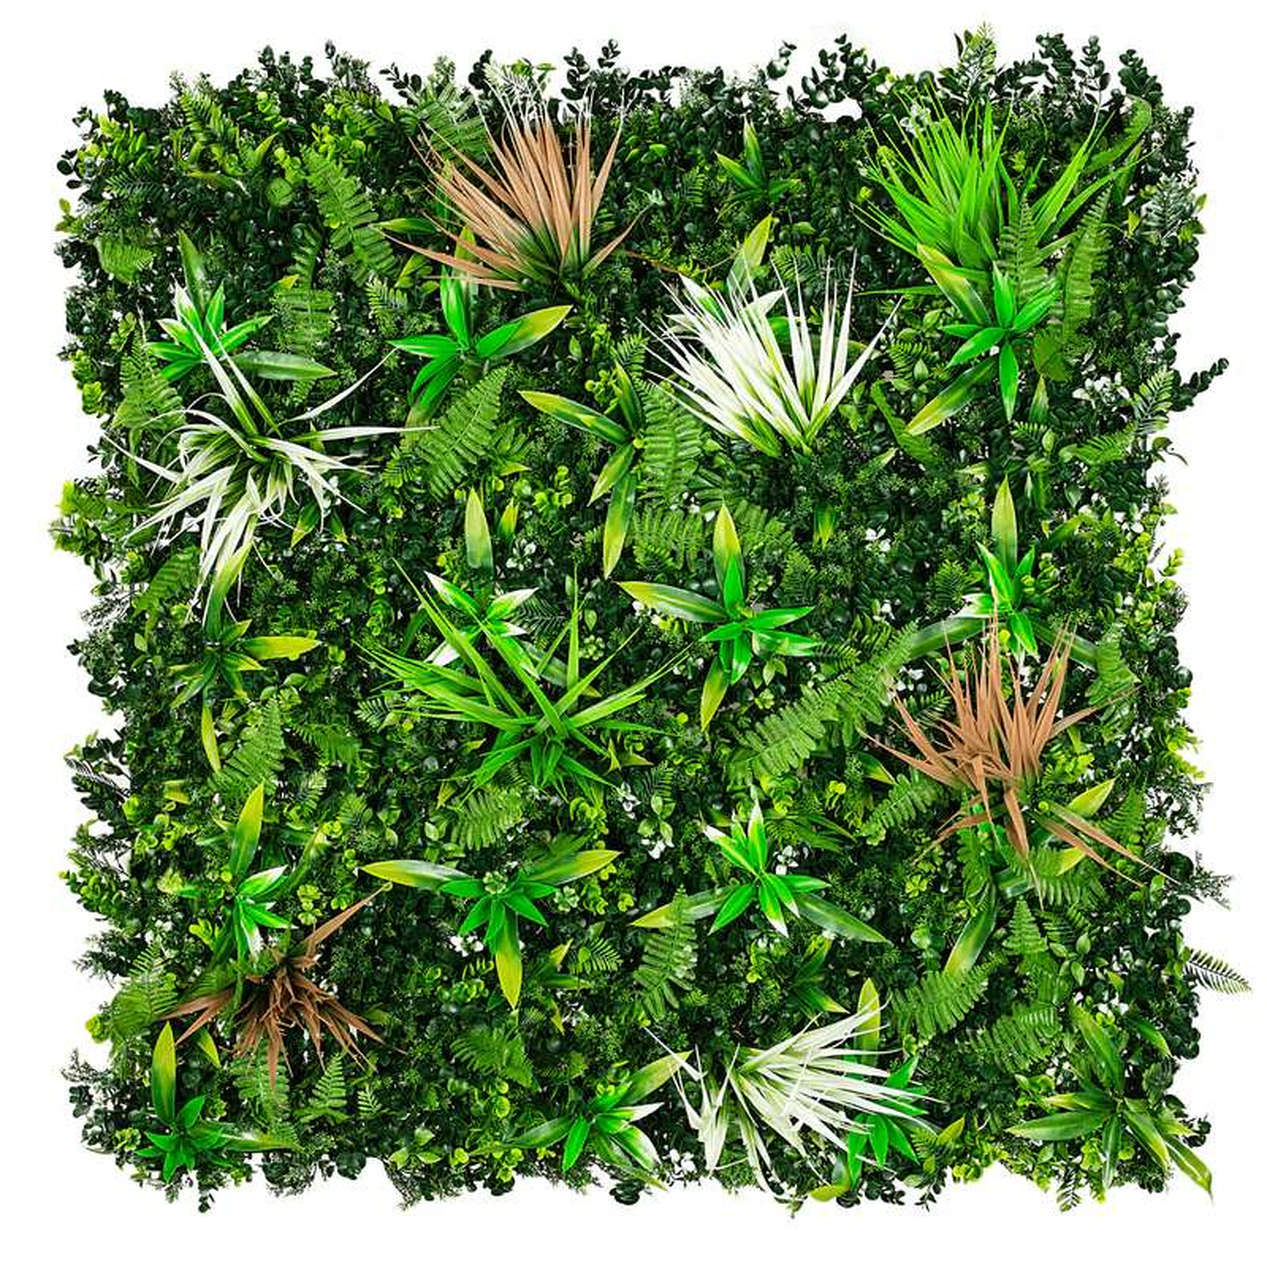 Luxury Wild Tropic Green Wall Panels (40x40) for Sale